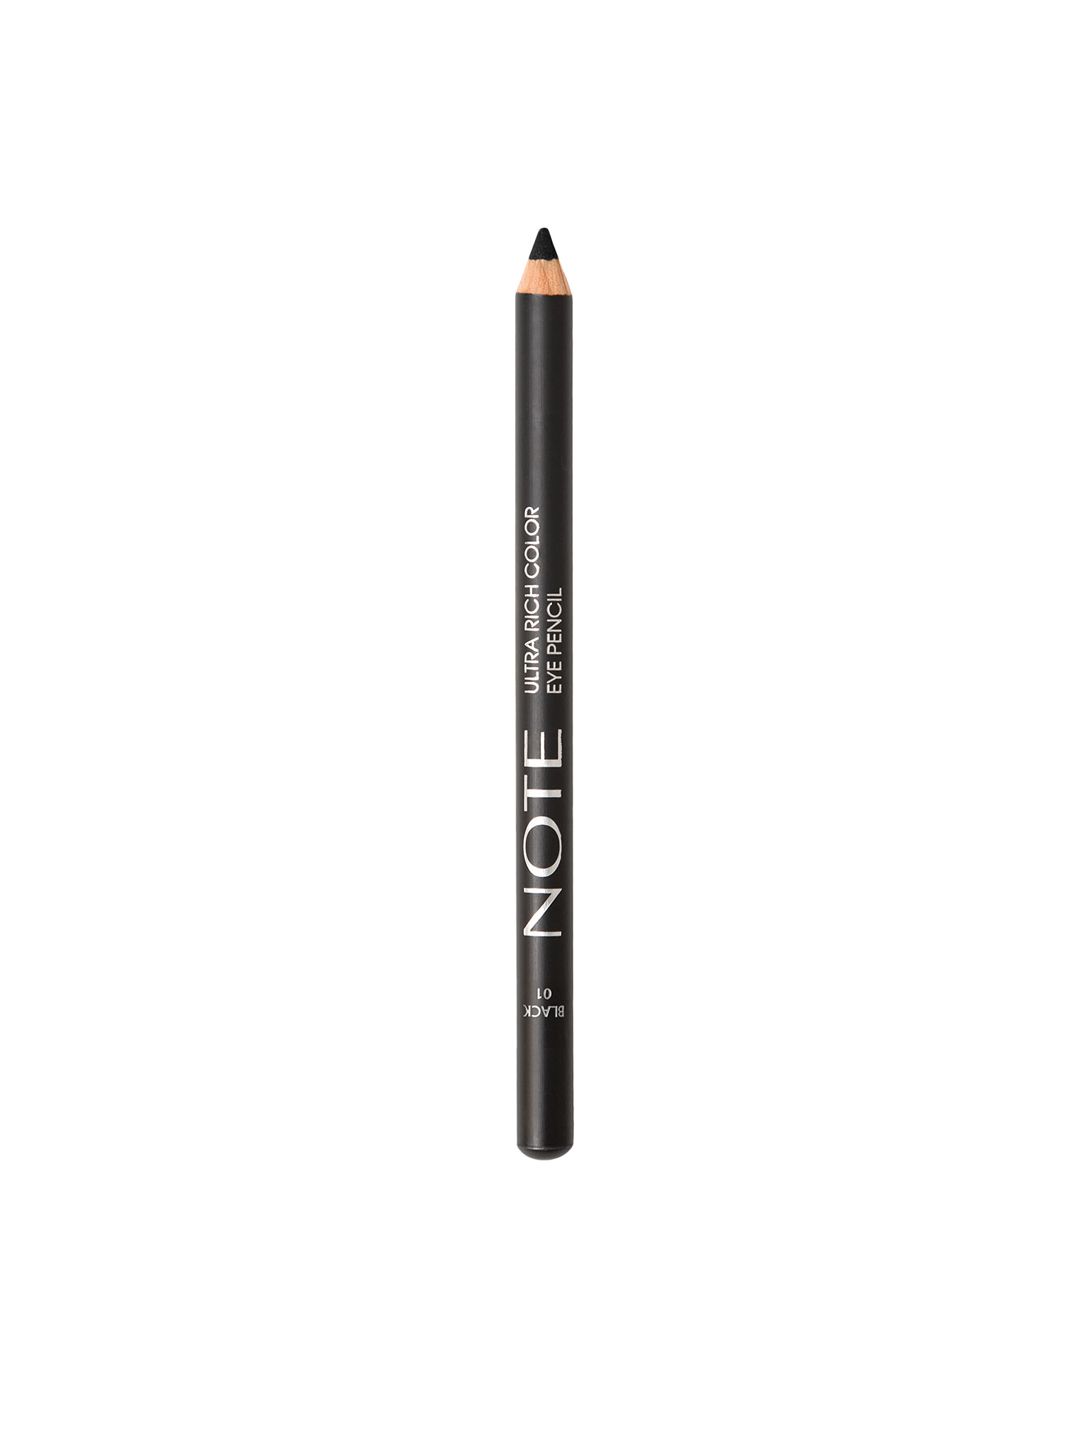 Note Black Ultra Rich Color Eye Pencil 01 Price in India